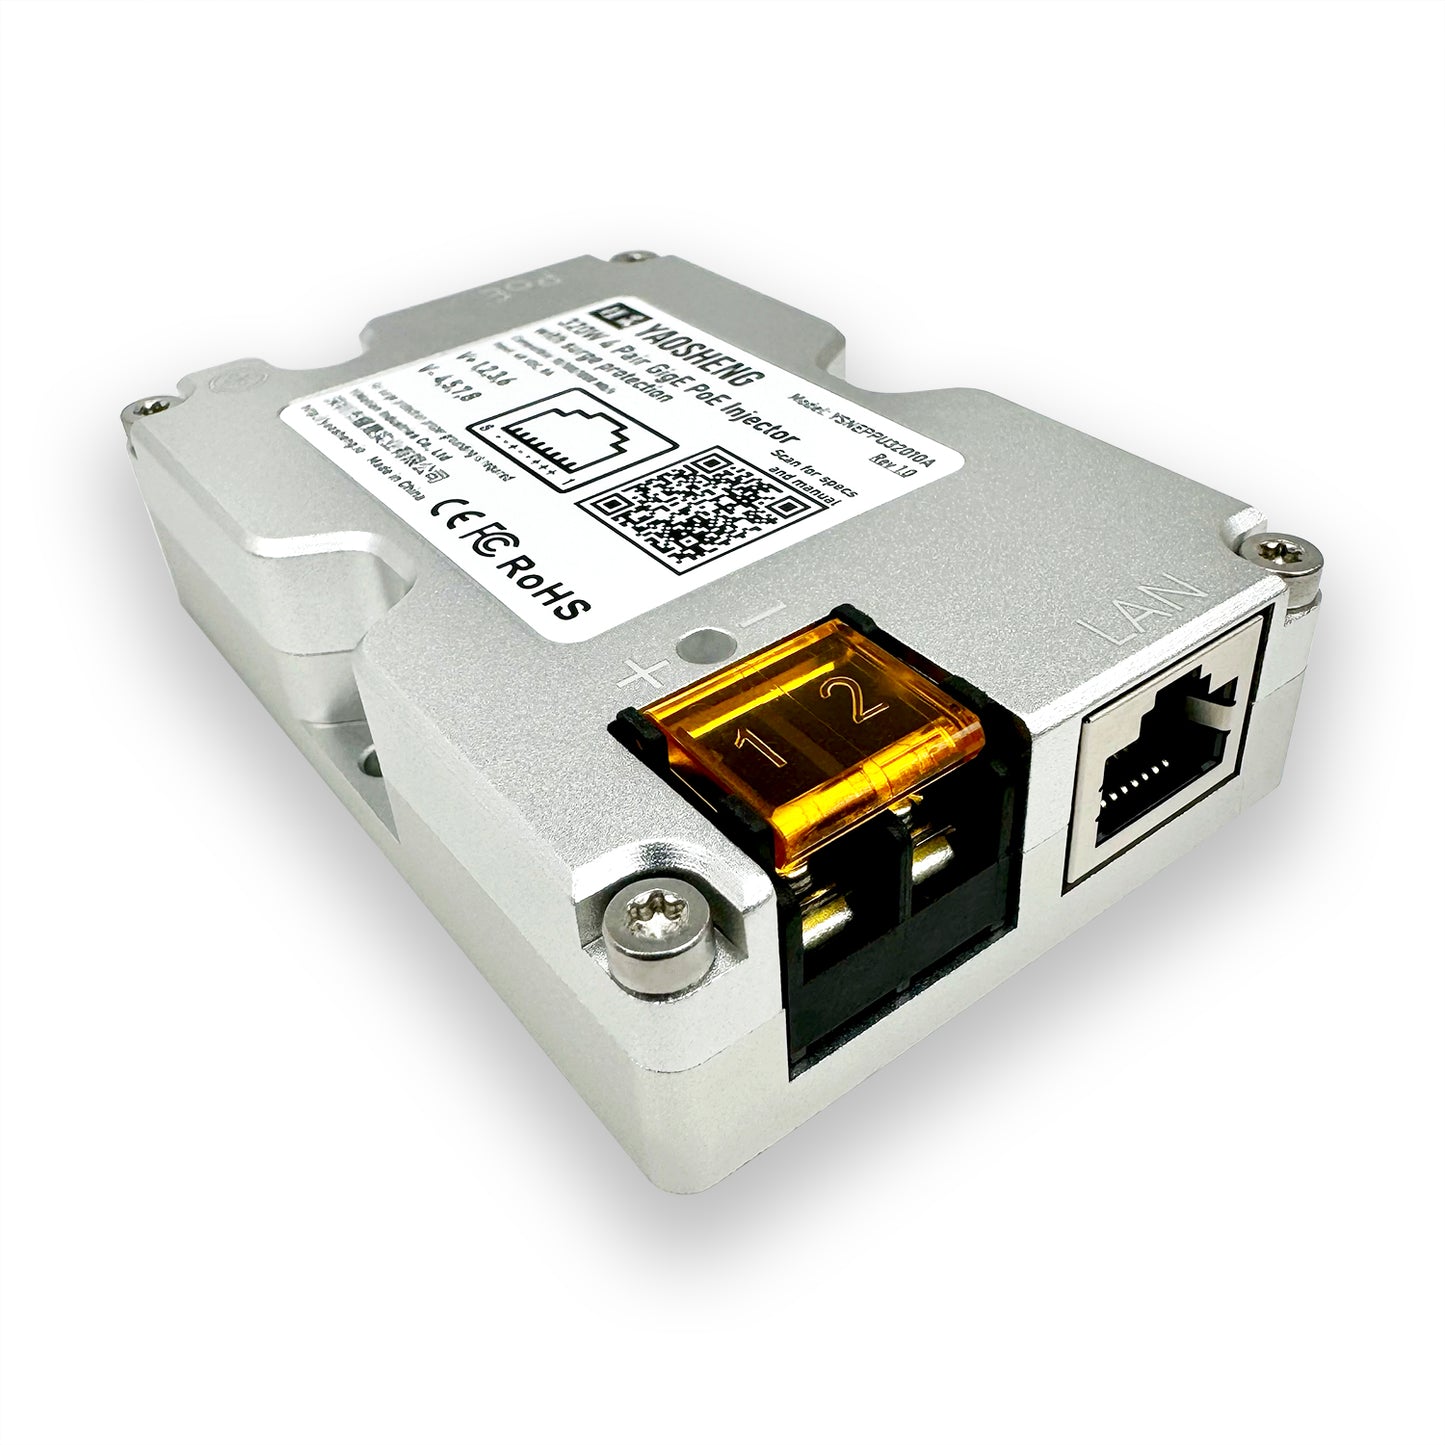 320W PoE Injector with Comprehensive Protection. Suitable for High Performance Dishy.